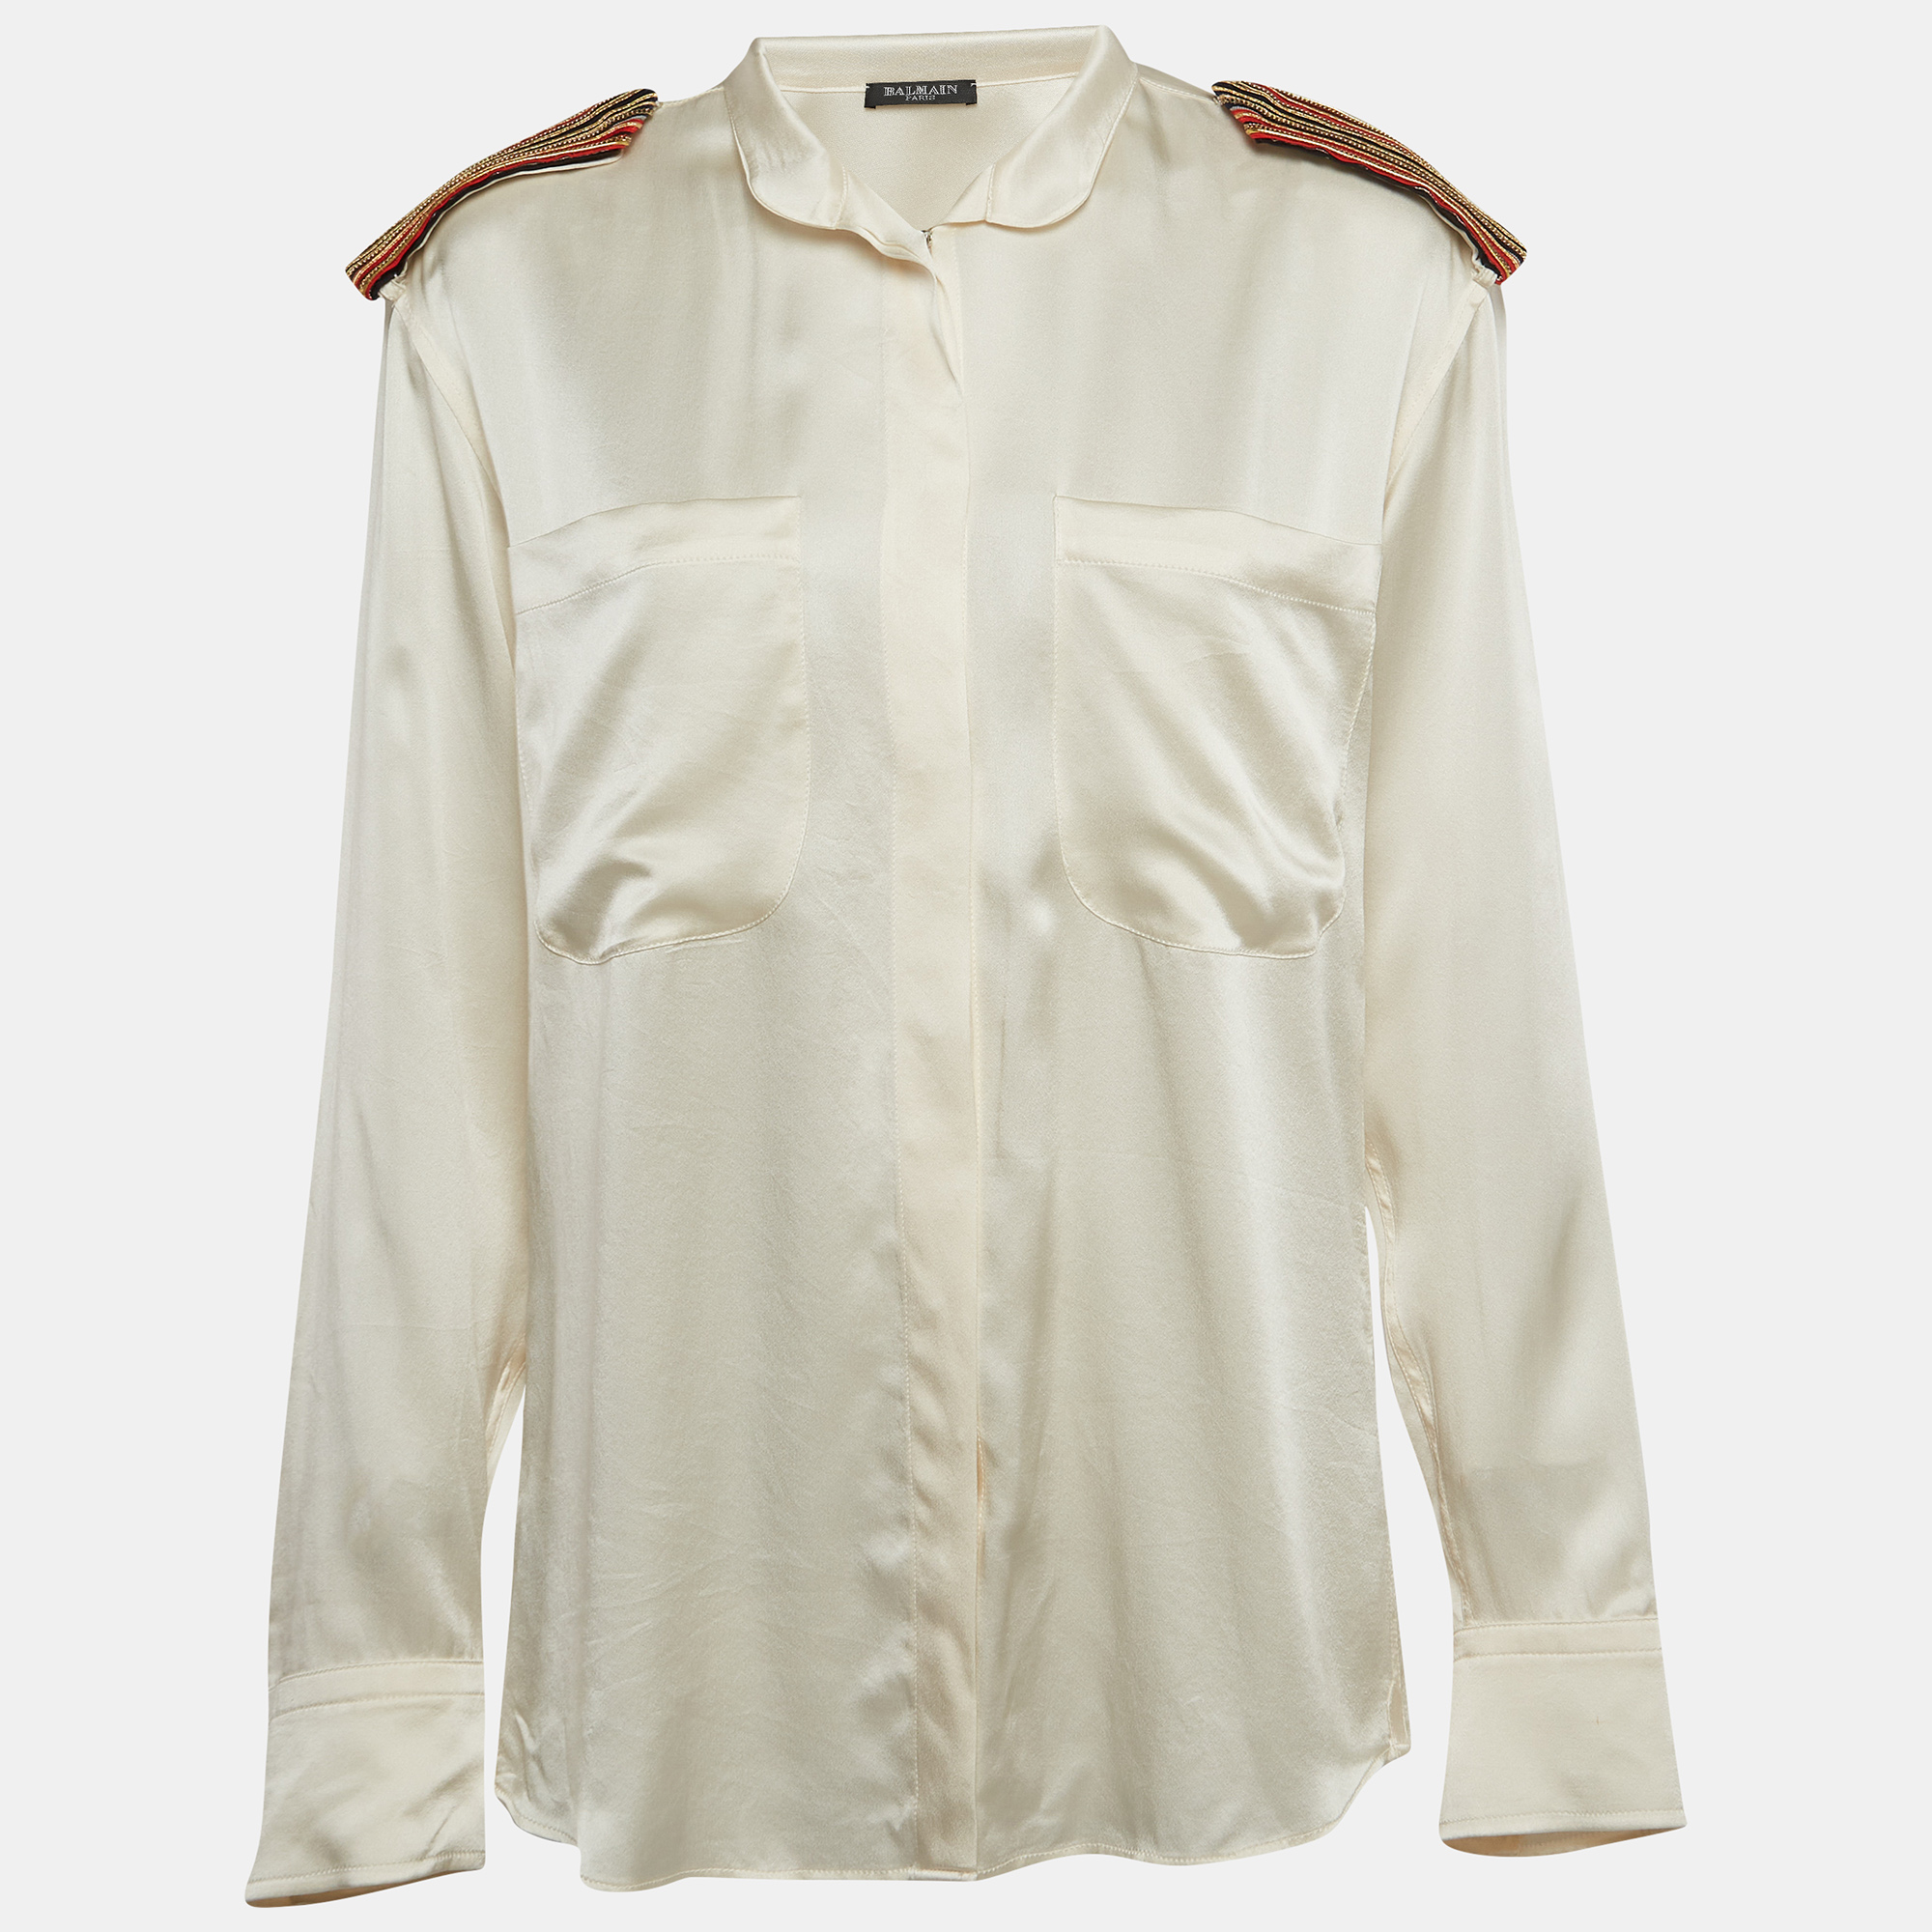 Pre-owned Balmain Off White Satin Silk Embellished Shoulder Patch Shirt S